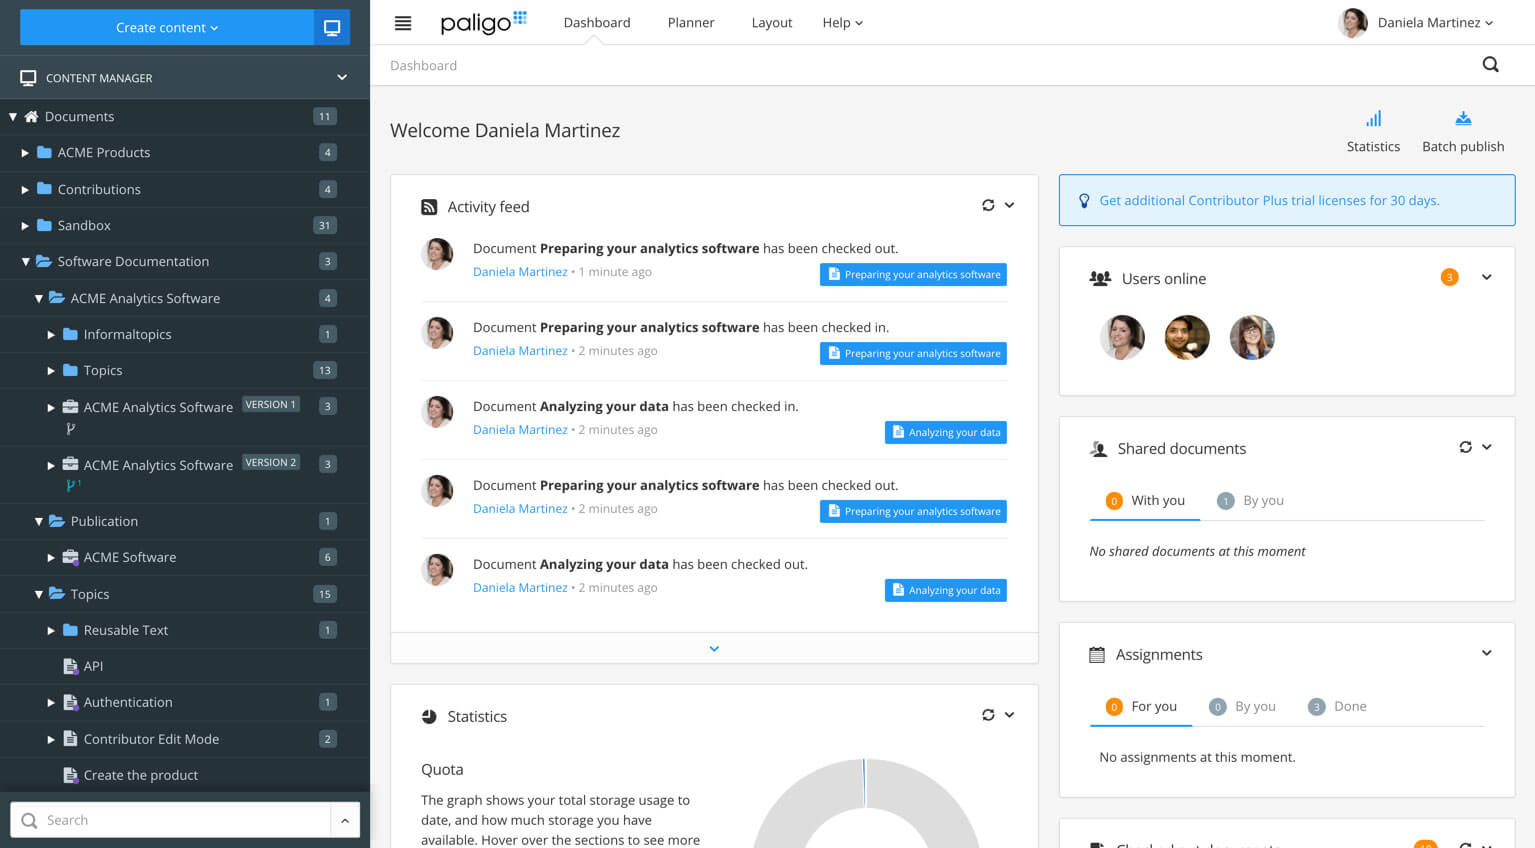 Paligo dashboard showing panels for Activity feed, Users, Statistics, Shared documents, Assignments, and Checked out documents.